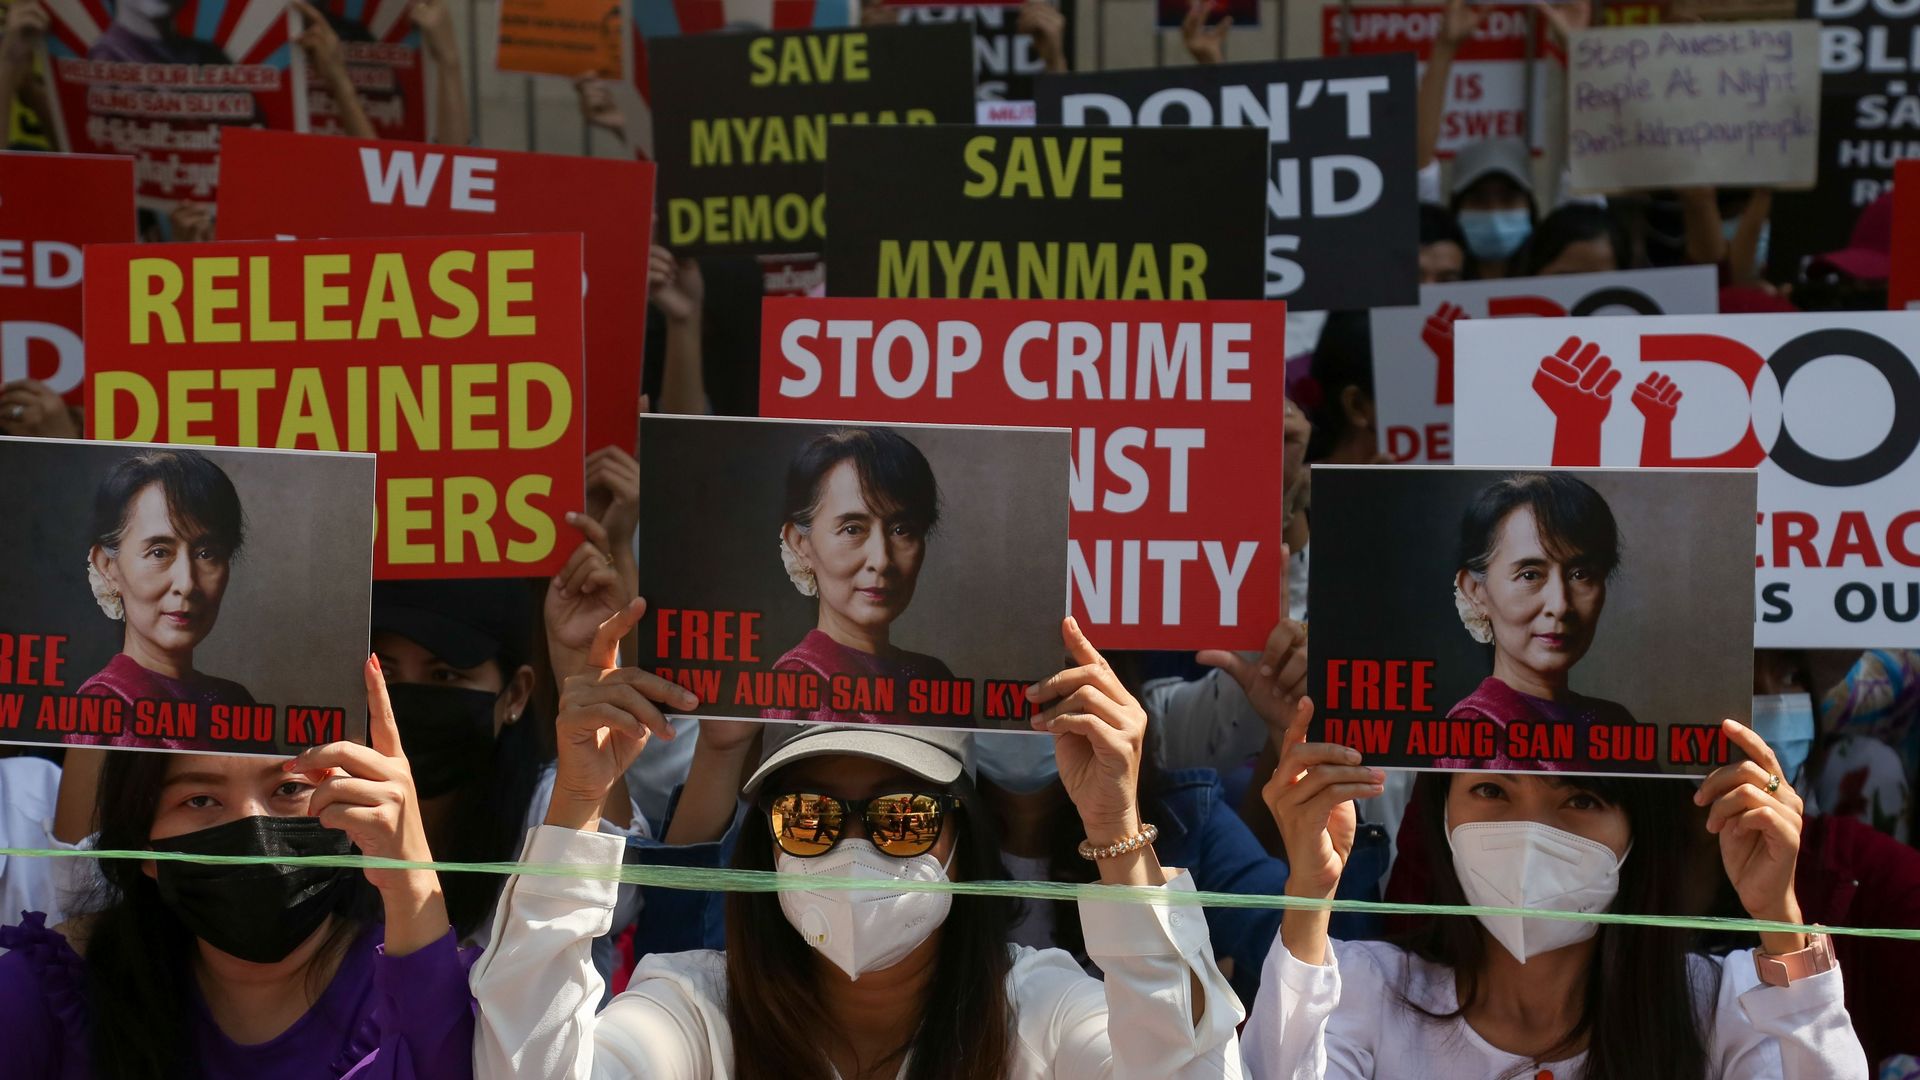 Protesters hold up signs calling for the release of detained Myanmar civilian leader Aung San Suu Kyi 